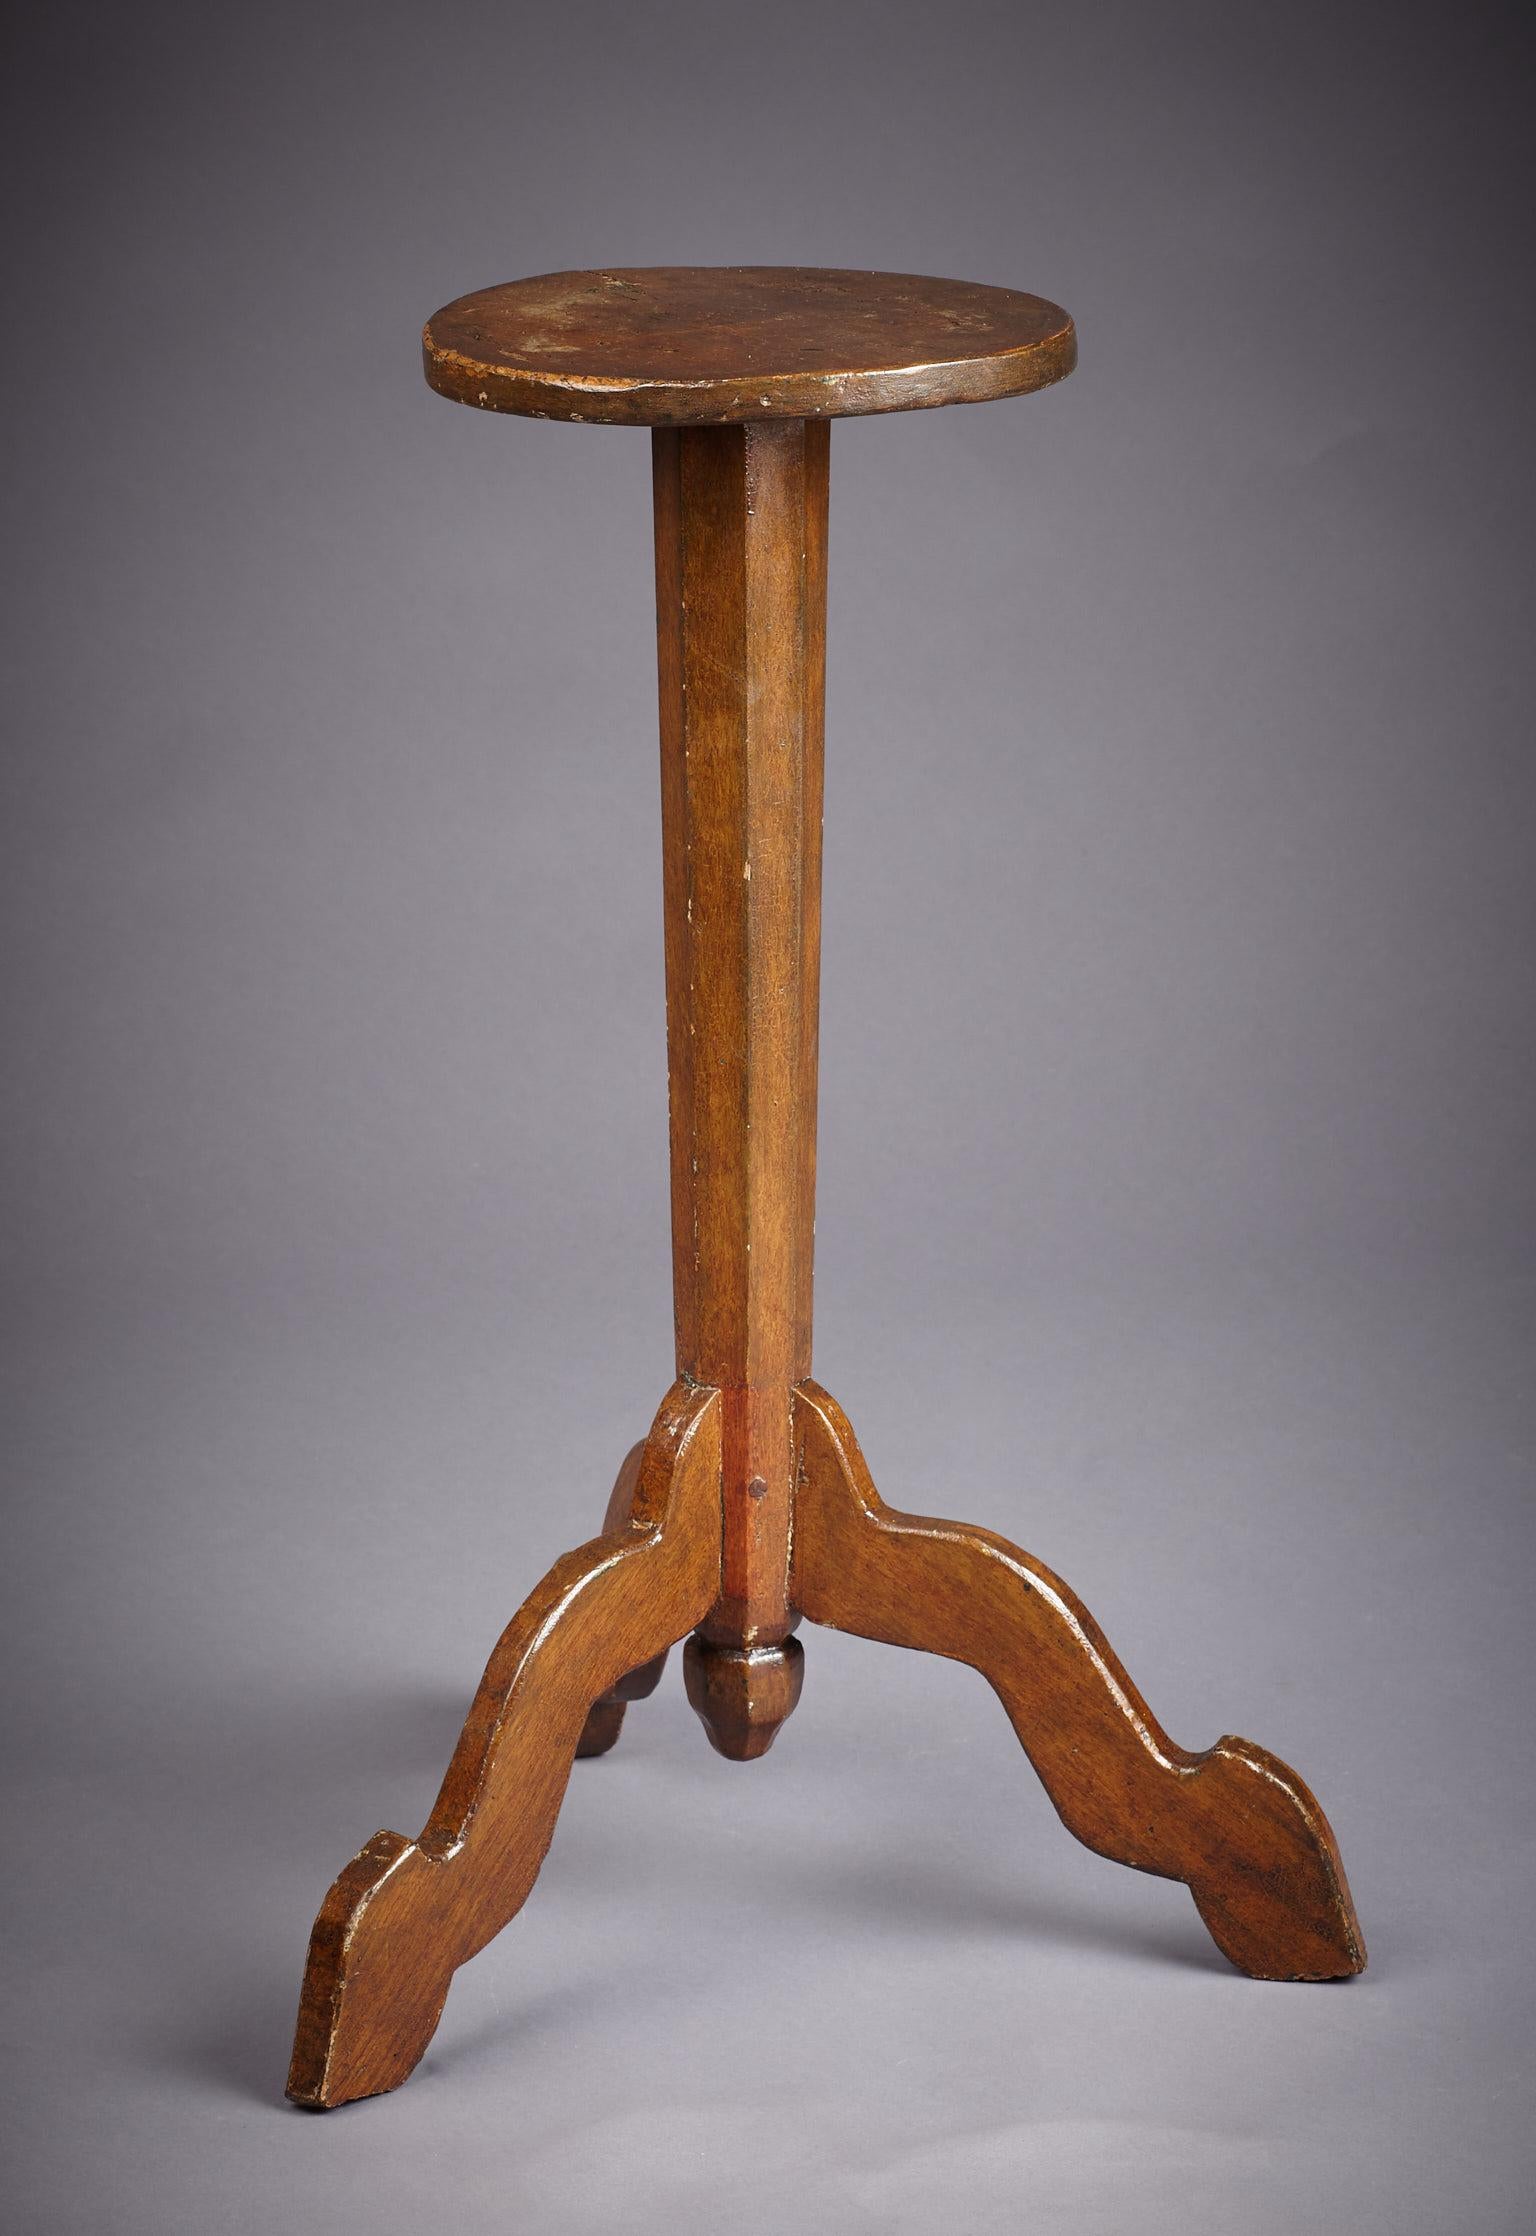 Painted Oak Candle-Stand, Early 18th Century, Queen Anne, England, circa 1710 (Frühes 18. Jahrhundert) im Angebot